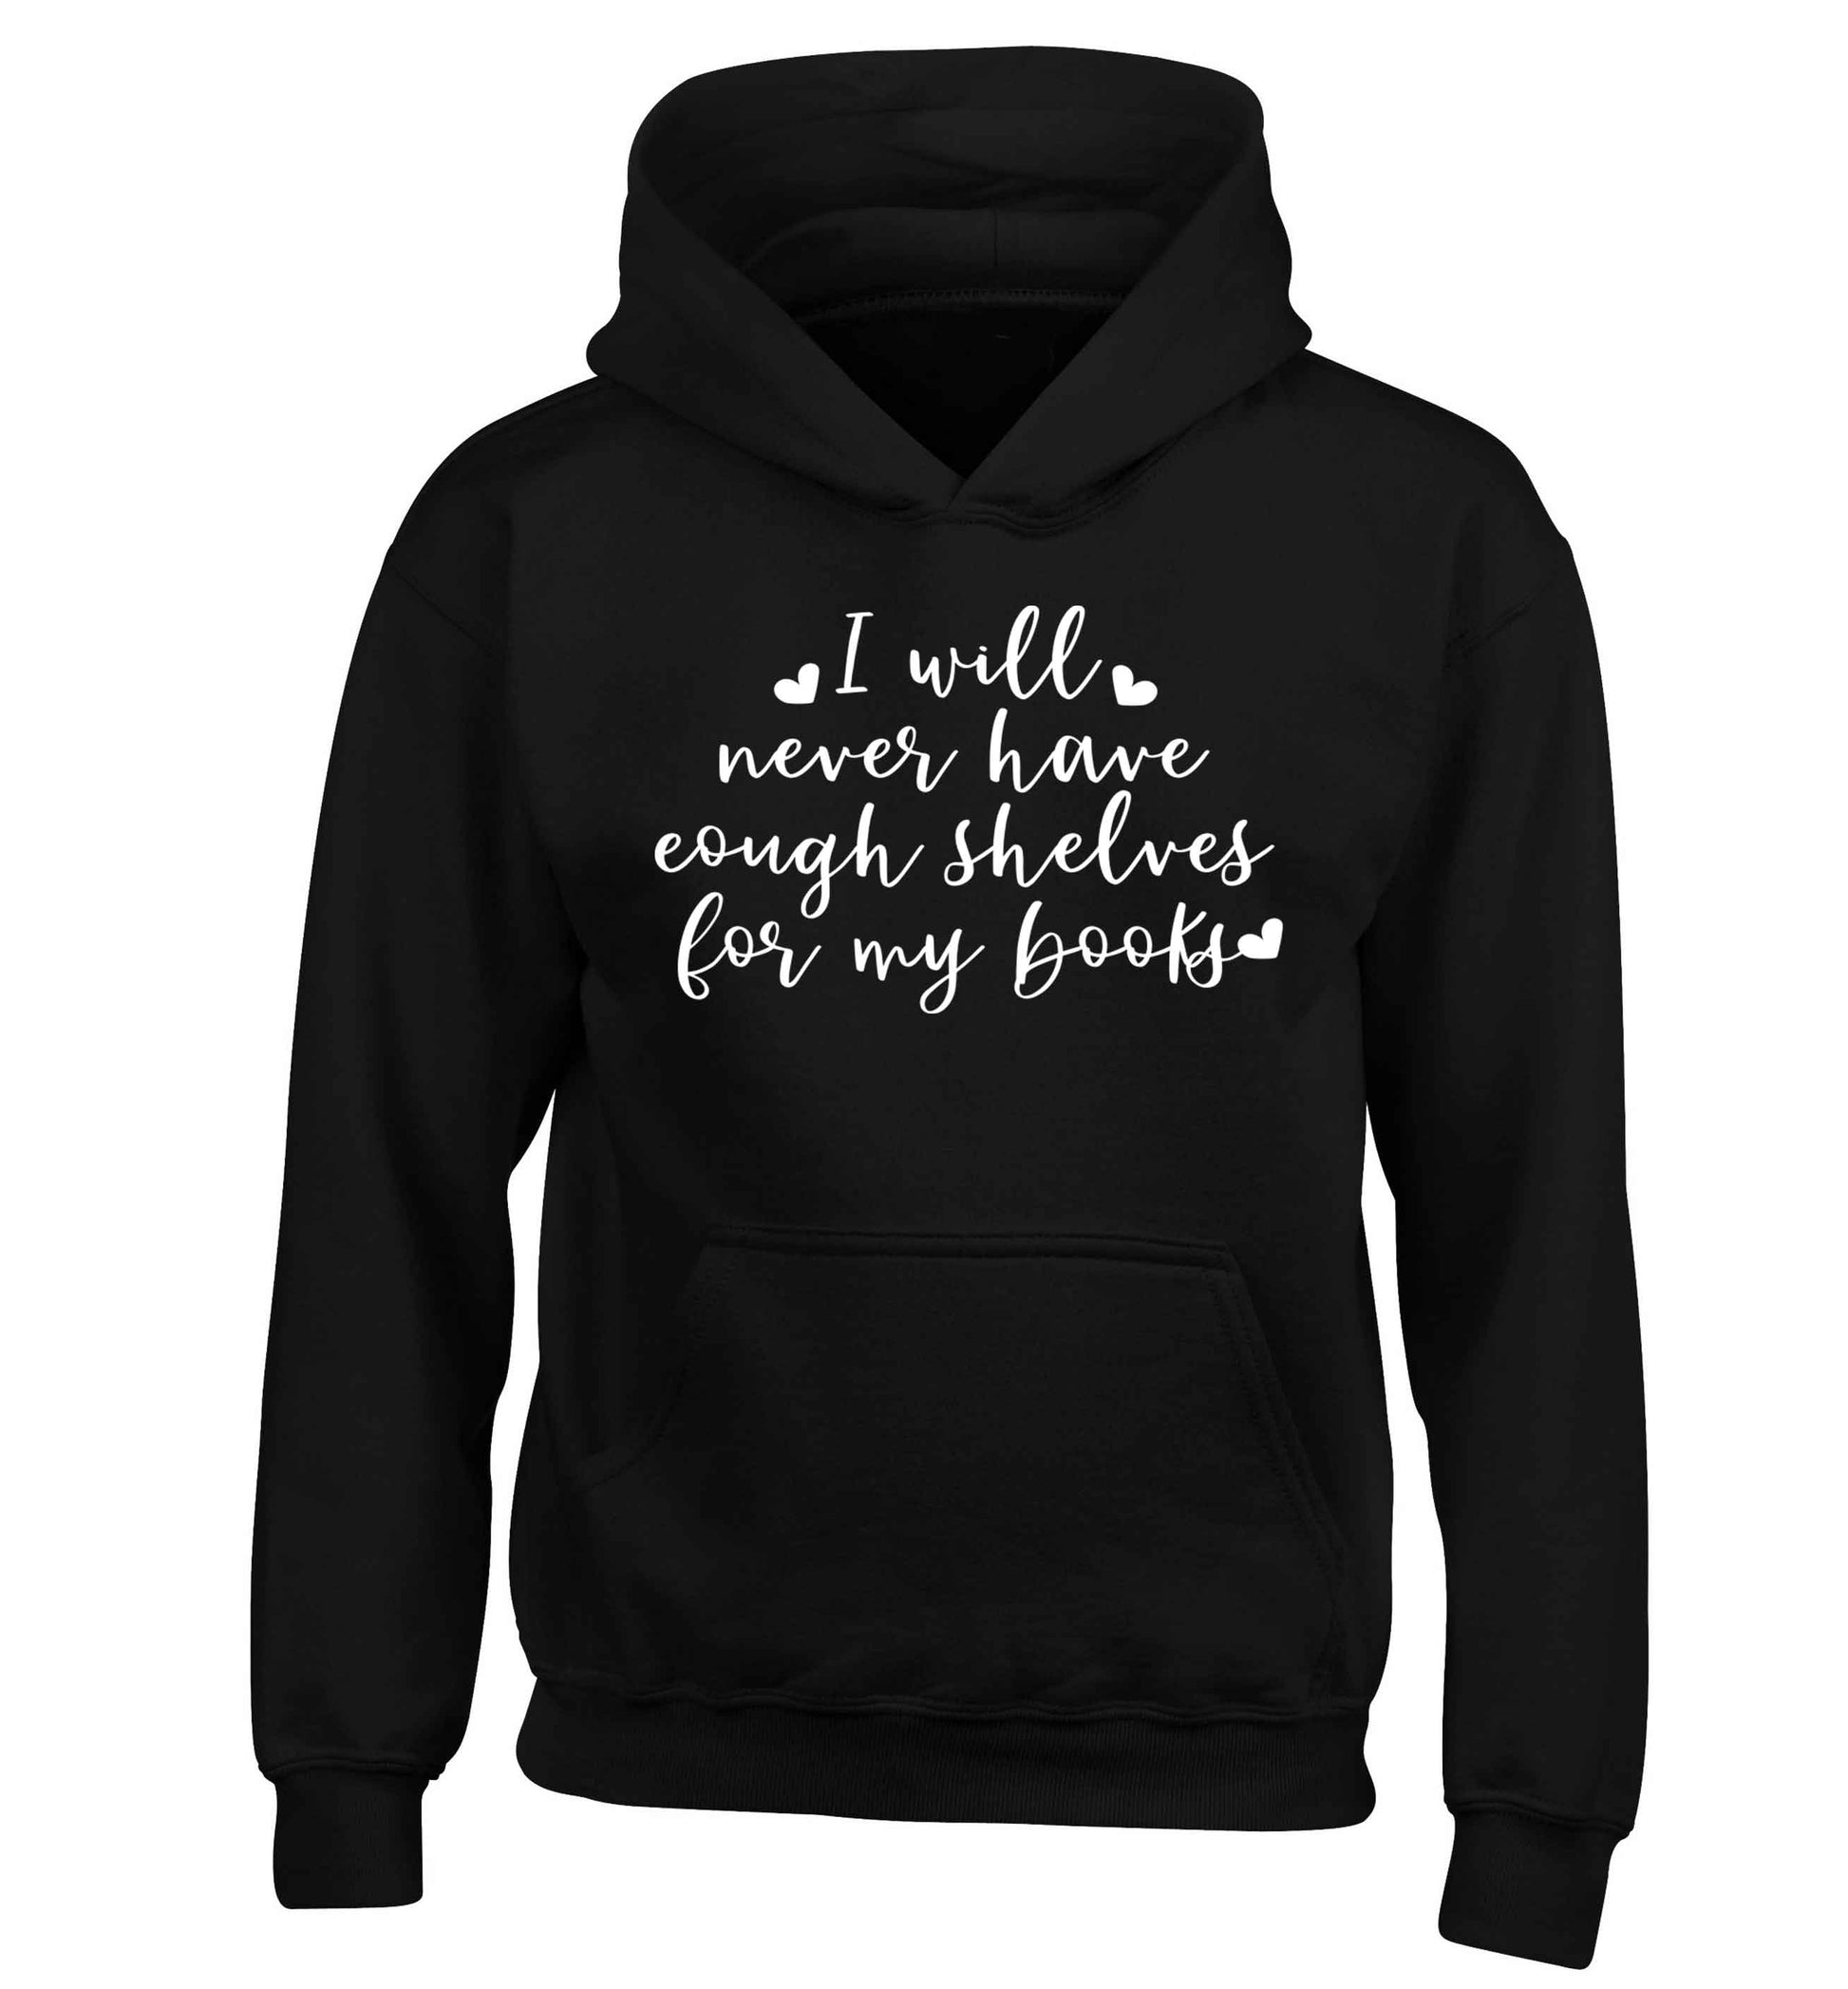 I will never have enough shelves for my books children's black hoodie 12-13 Years